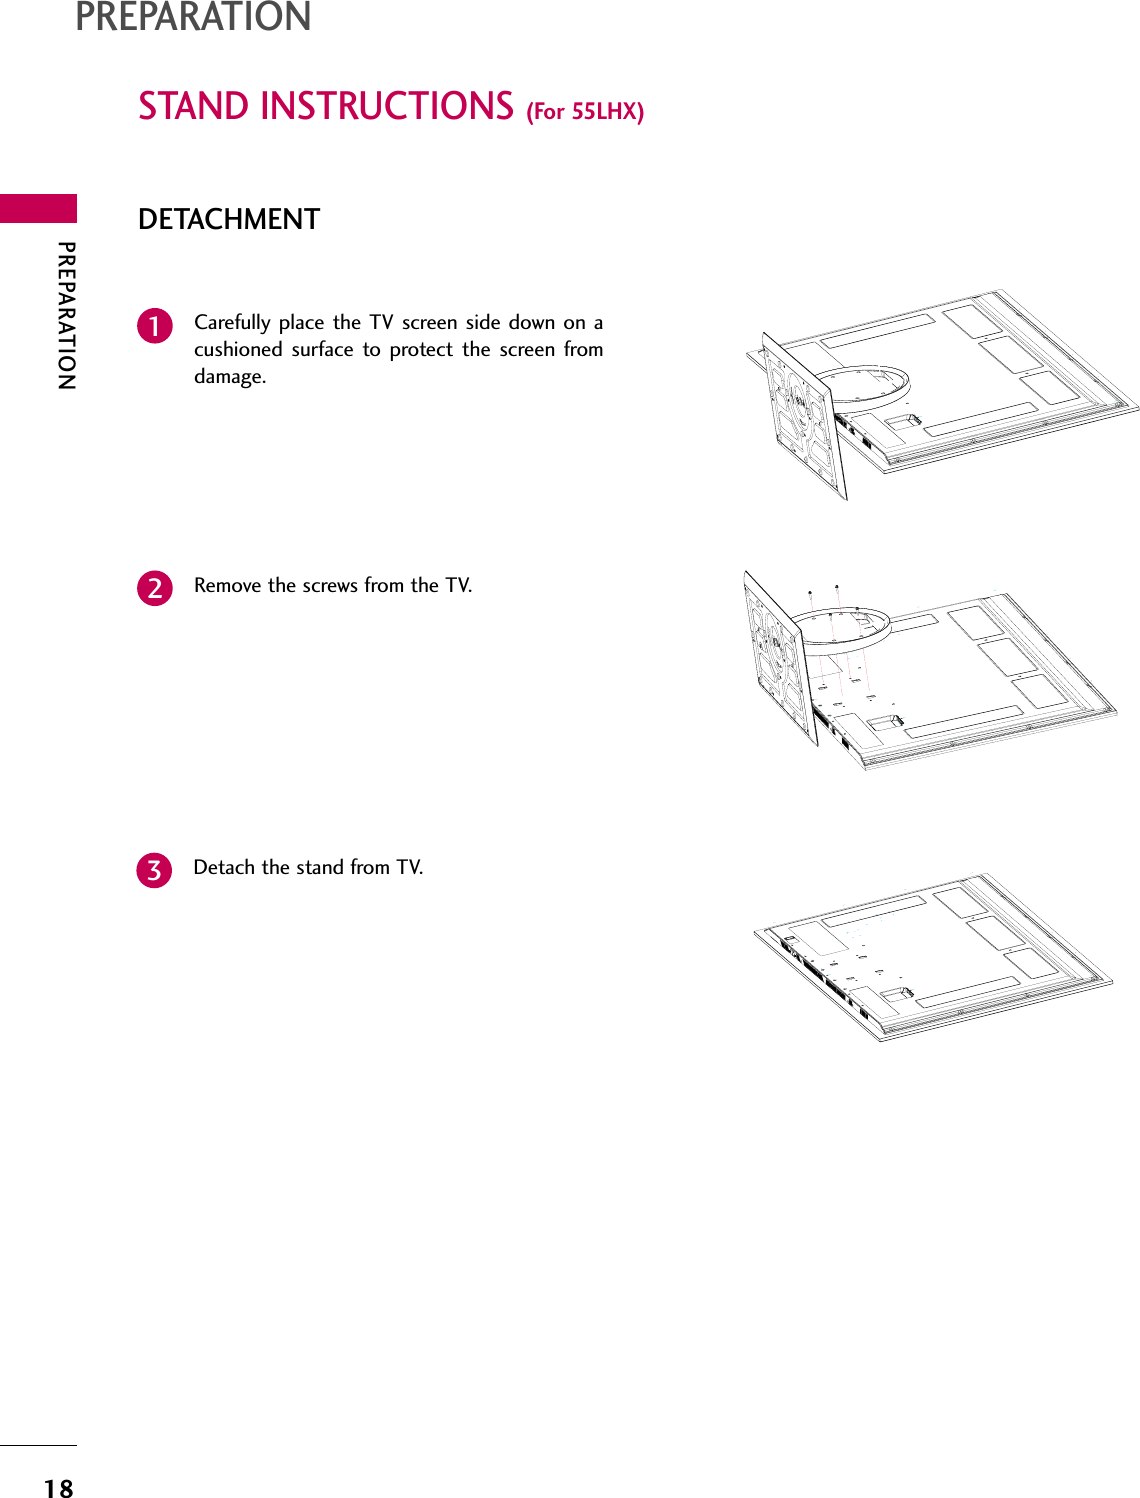 PREPARATION18STAND INSTRUCTIONS (For 55LHX)PREPARATIONDETACHMENTCarefully place the TV screen side down on acushioned surface to protect the screen fromdamage.1Remove the screws from the TV.2Detach the stand from TV.3